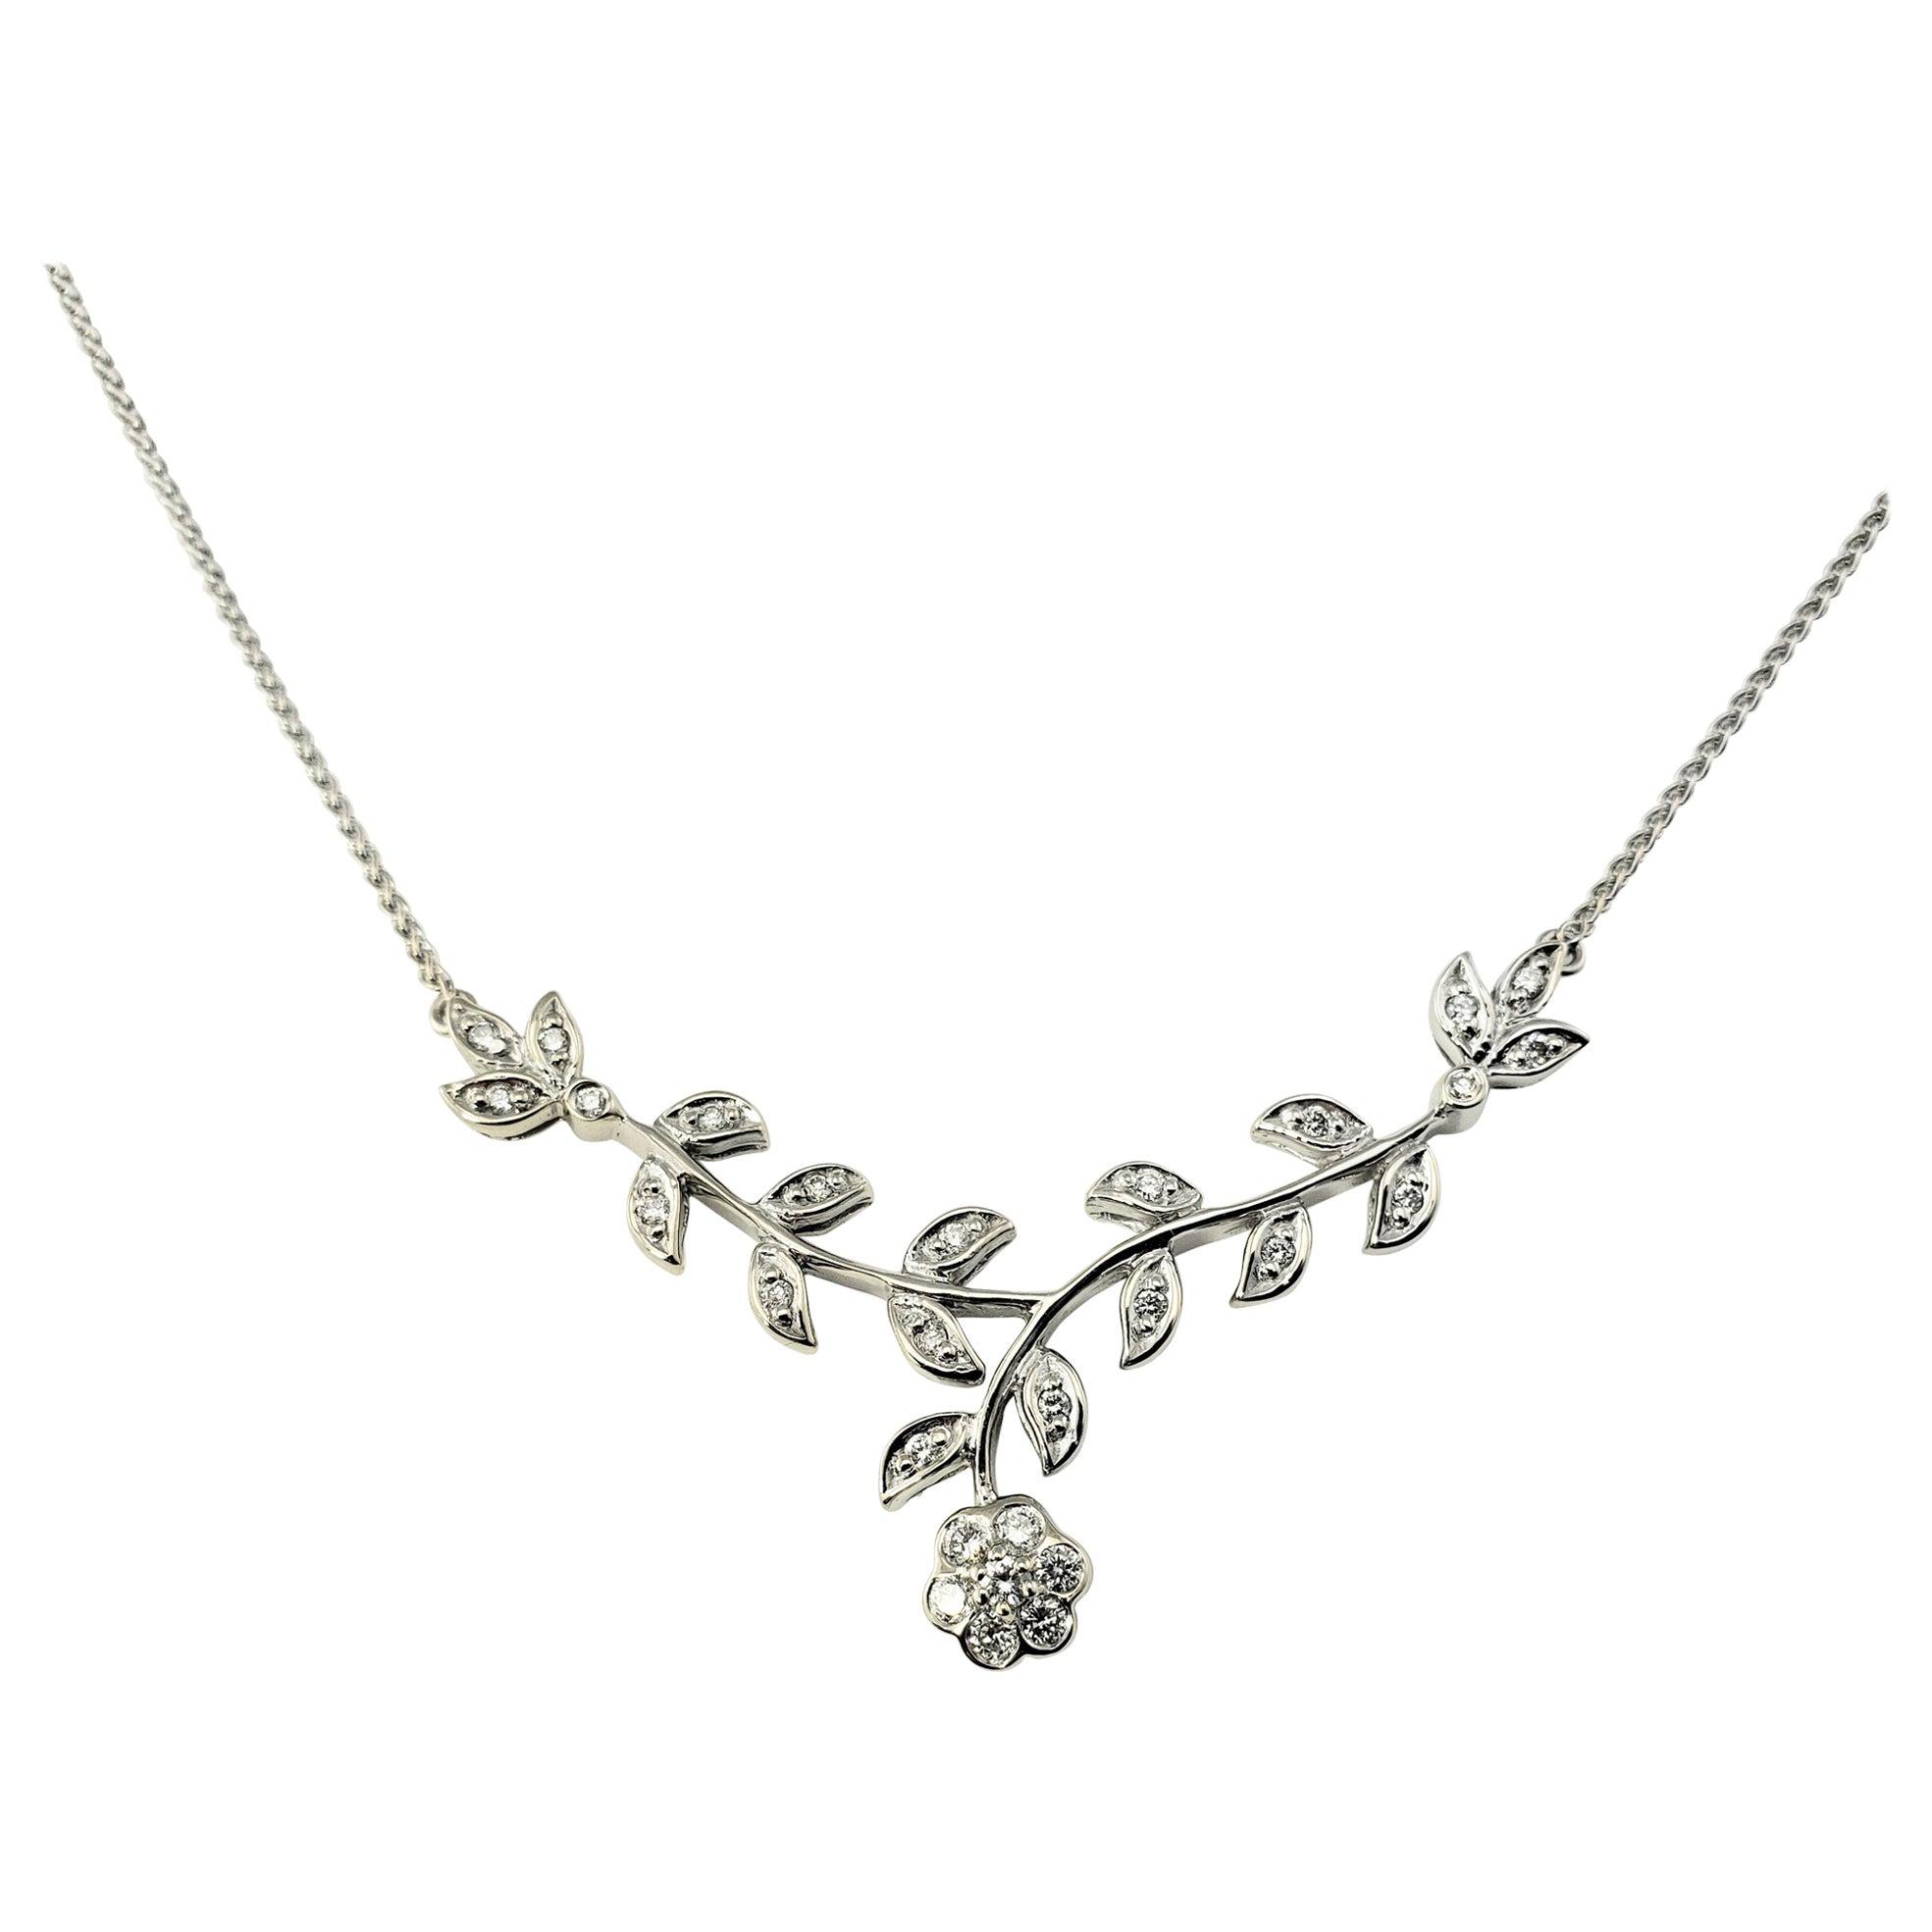 14 Karat White Gold and Diamond Floral Necklace